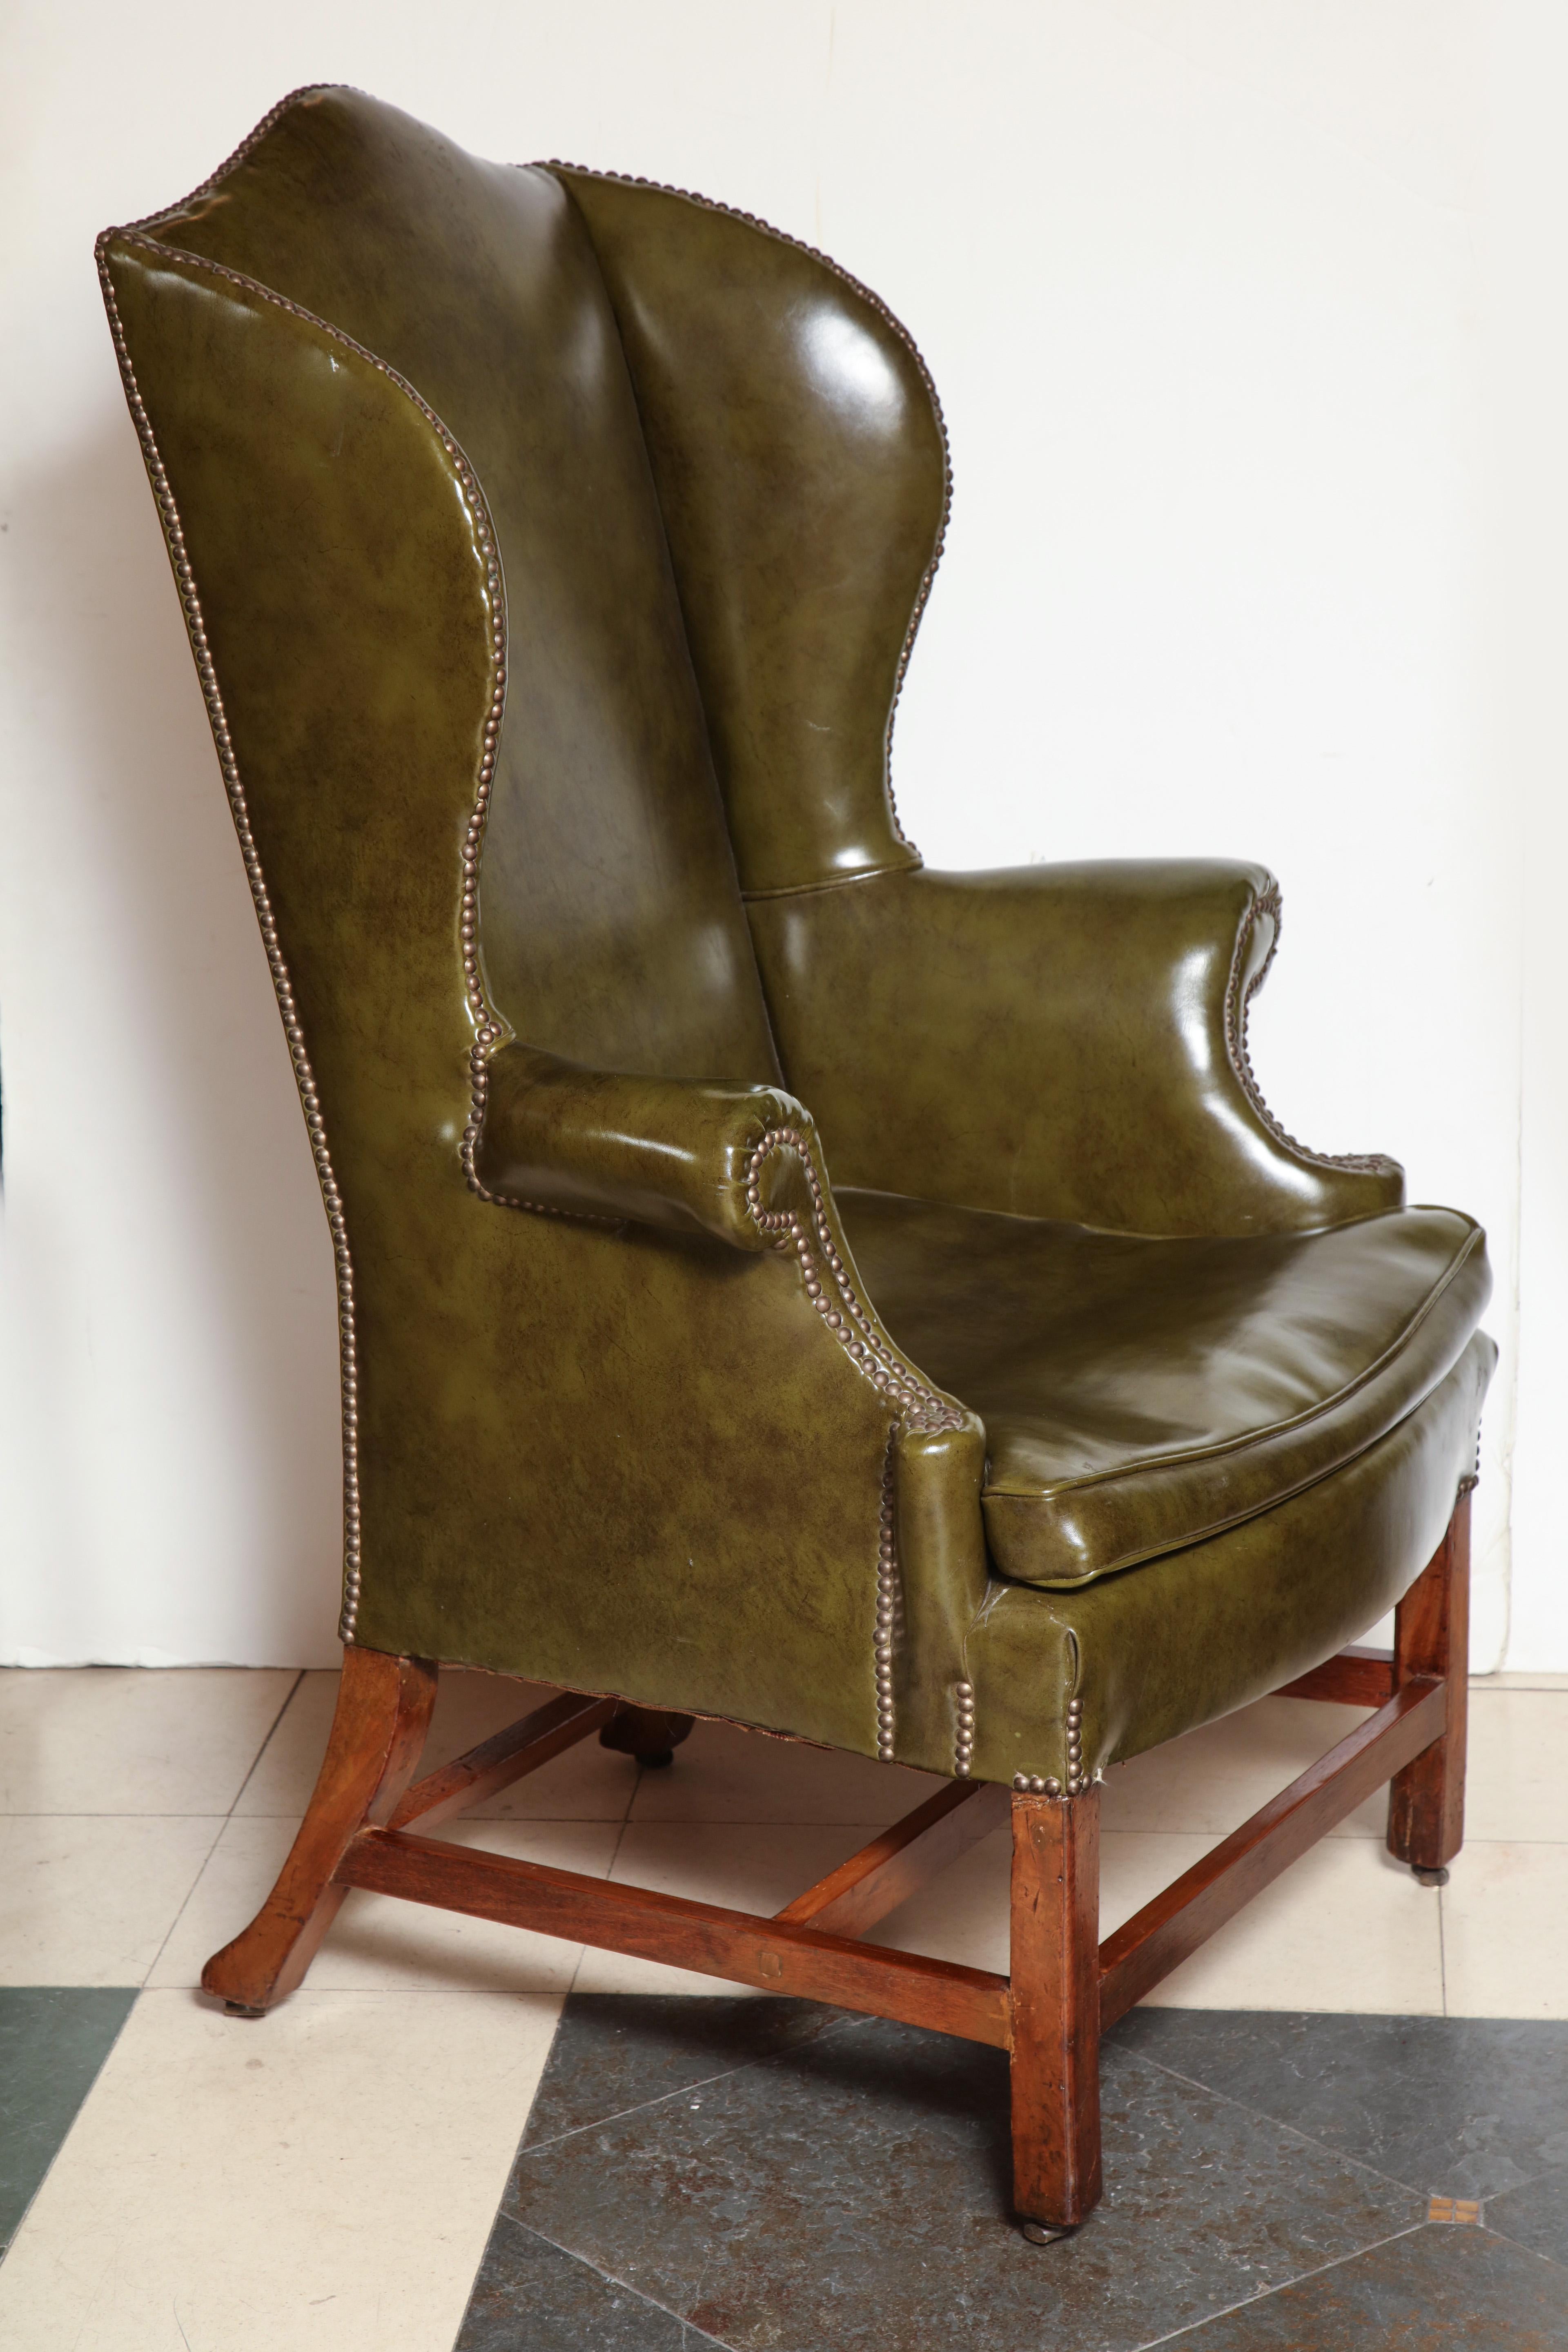 A fine English George III mahogany leather upholstered high back wing chair with scrolling arms and a stretcher base.